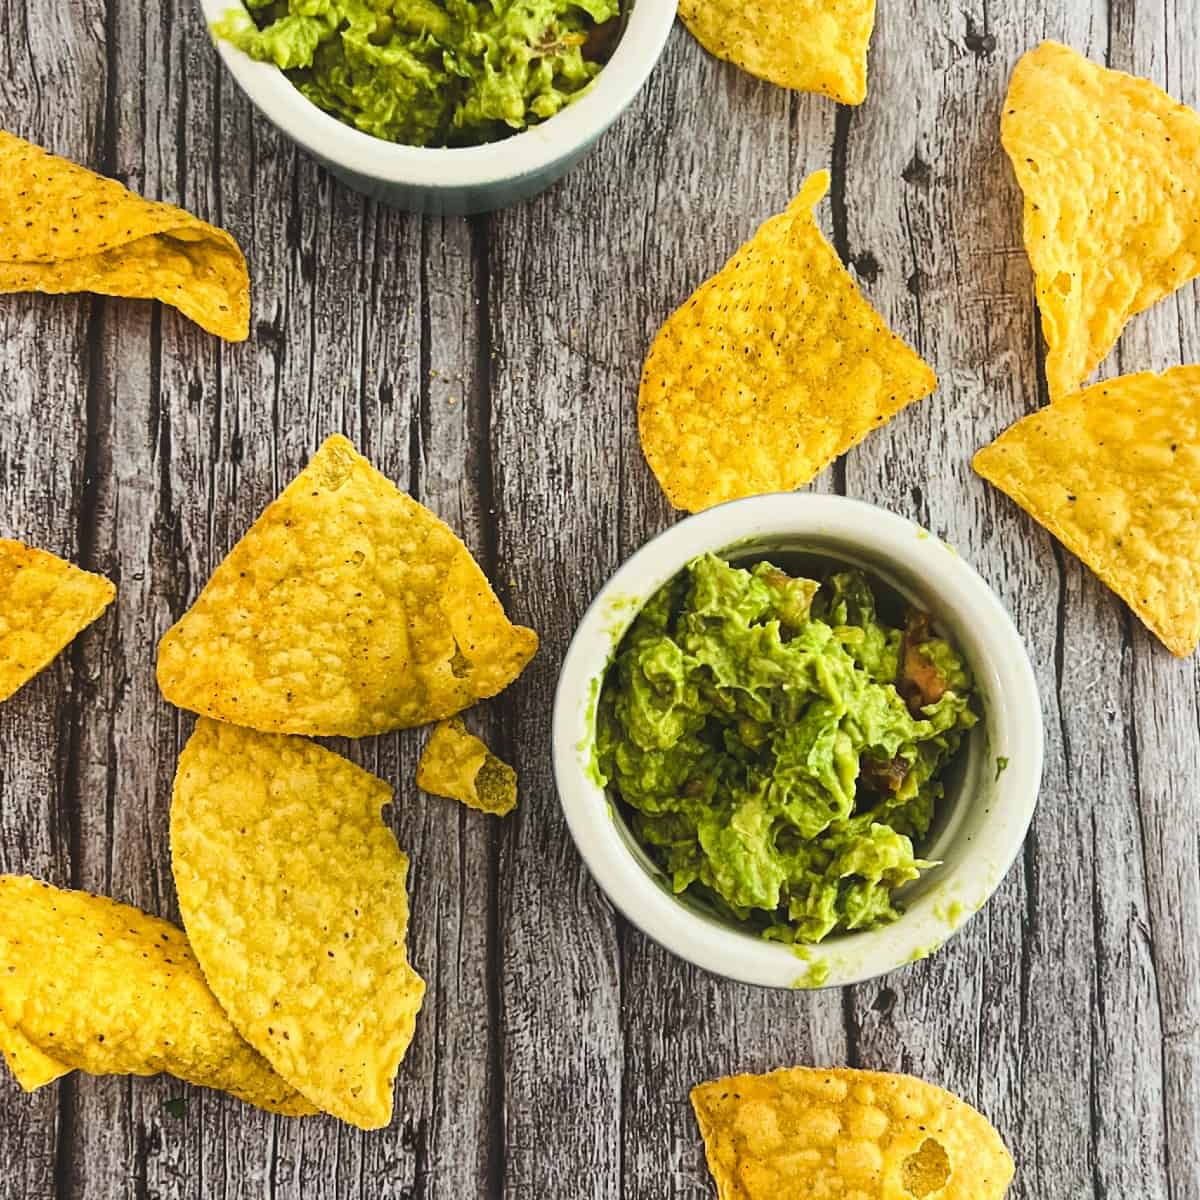 Two bowls of 4-ingredient guacamole recipe with a chunky texture.
Tortilla chips are scattered around the bowls. 